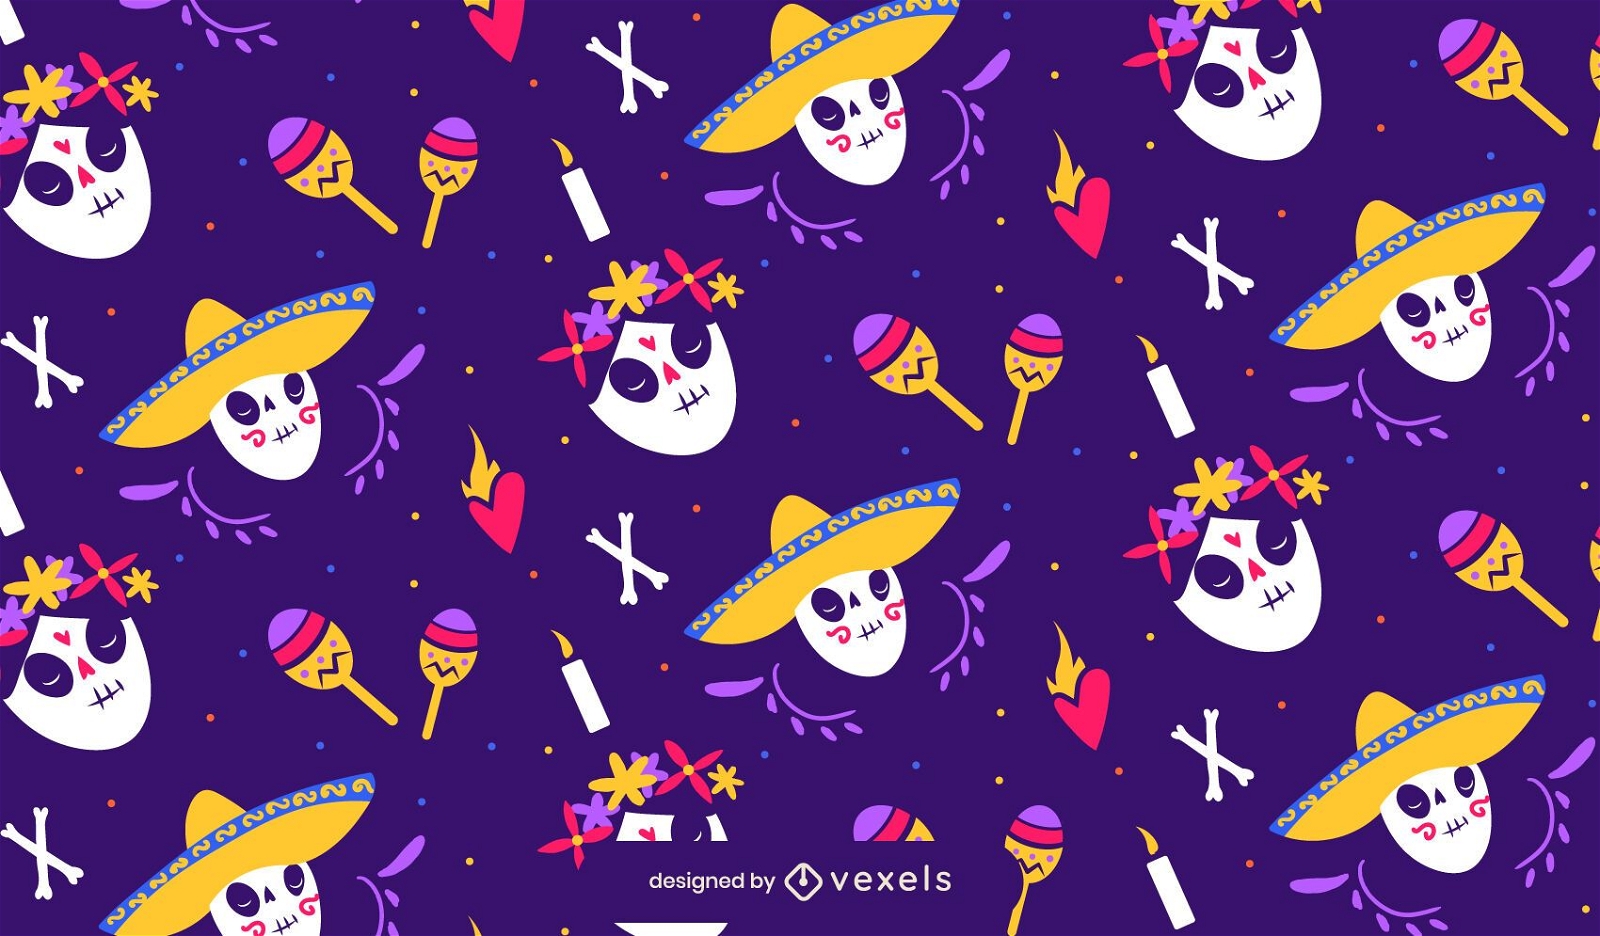 Day of the dead pattern design